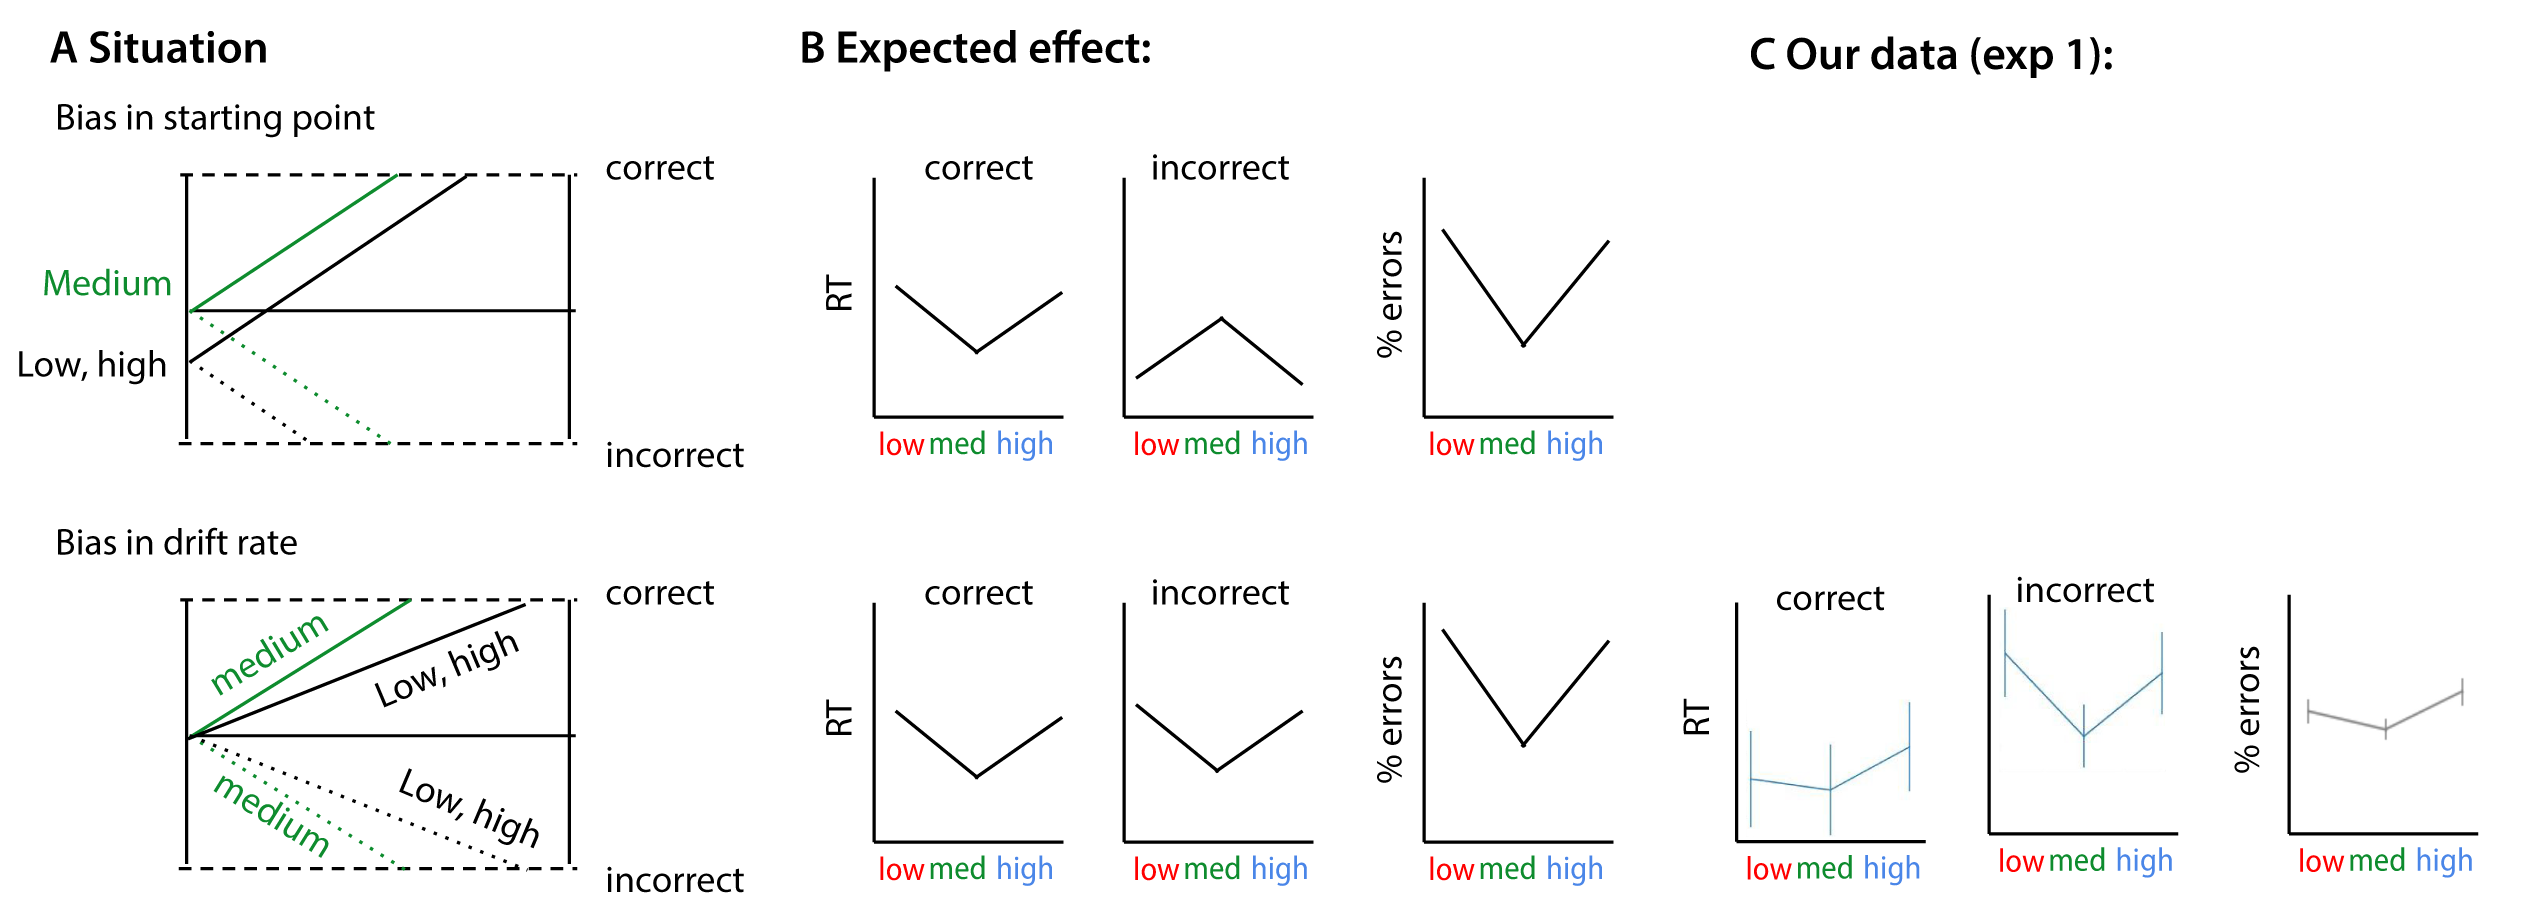 Possible effects of bias on choice behavior (following figure 2 from Mulder et al. (2012)). A) Effects of bias explained by the drift-diffusion model. When prior information is invalid (‘low’, ‘high’) for the choice at hand, subjects will have slower and less correct choices compared with choices where no information is provided (neutral, ‘medium’). These effects can be explained by changes in the starting point or the drift rate of the accumulation process. B) Both accounts have different effects on RT and accuracy data. C) The data from our current experiment is more in line with a drift rate account of response bias.